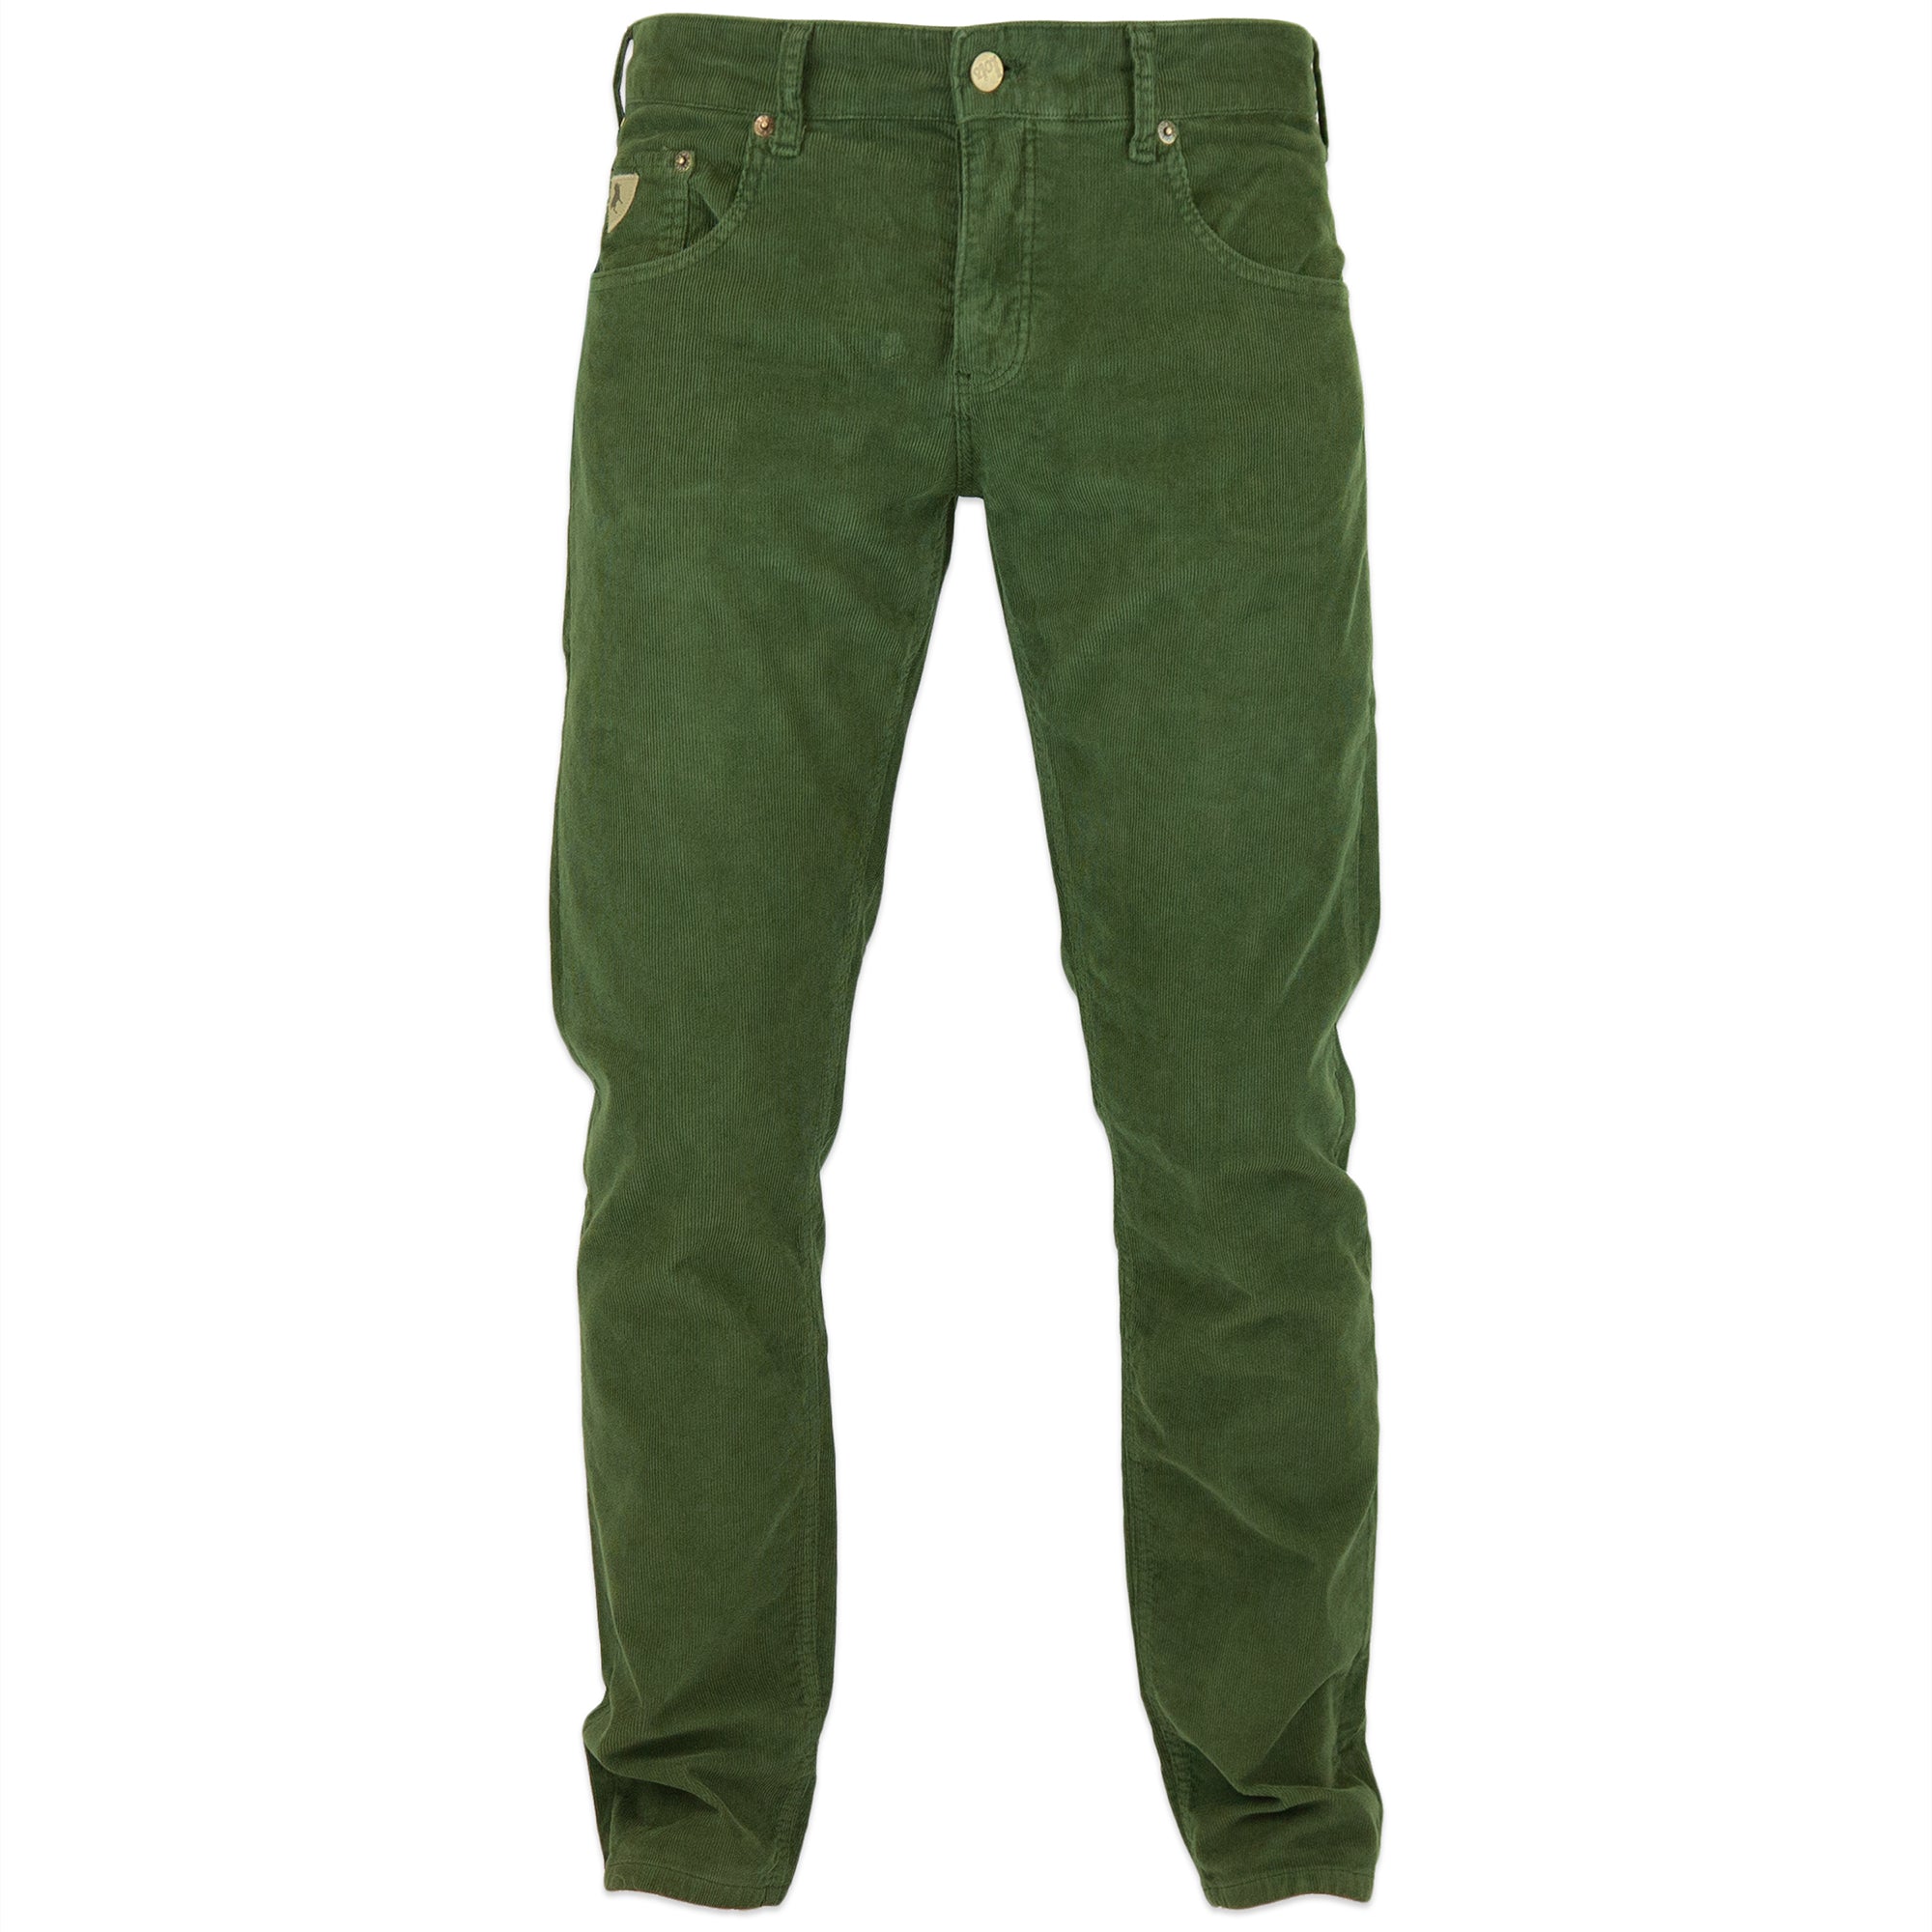 Lois Sierra Needle Cord Trousers - Olive